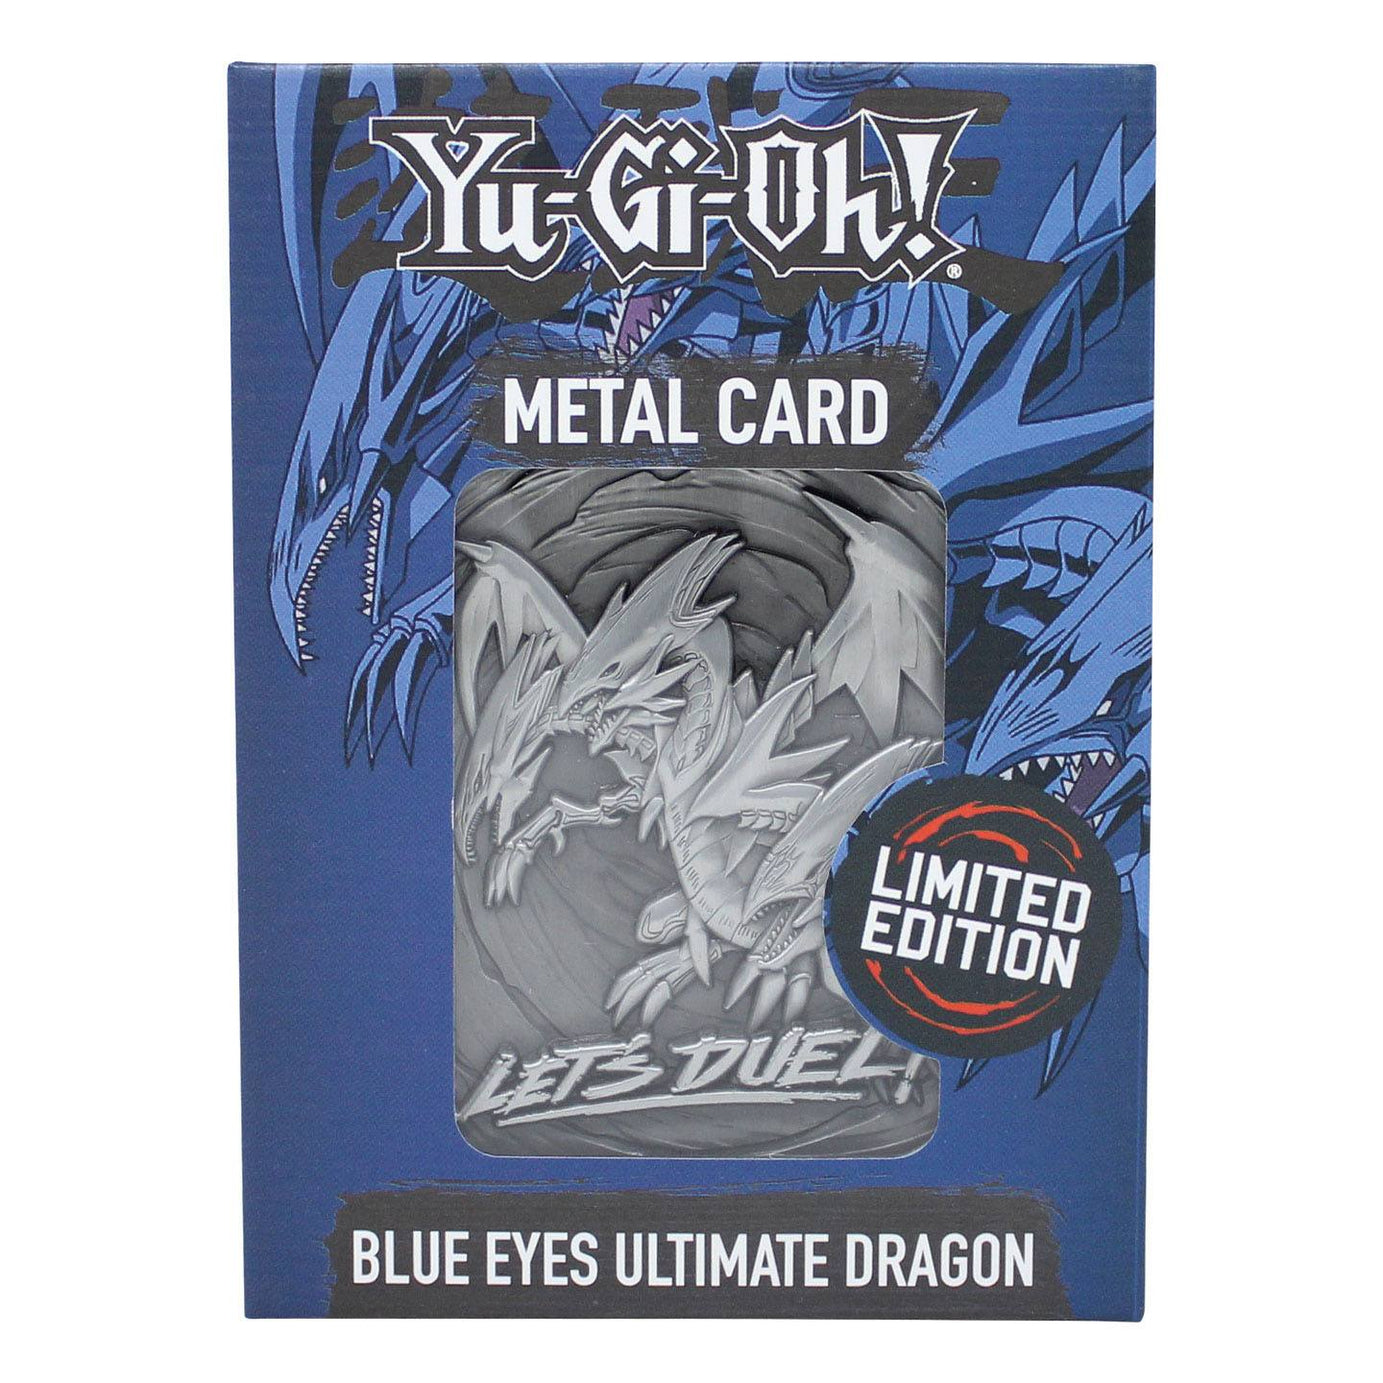 Metal Card Blue Eyes Ultimate Dragon Limited Edition